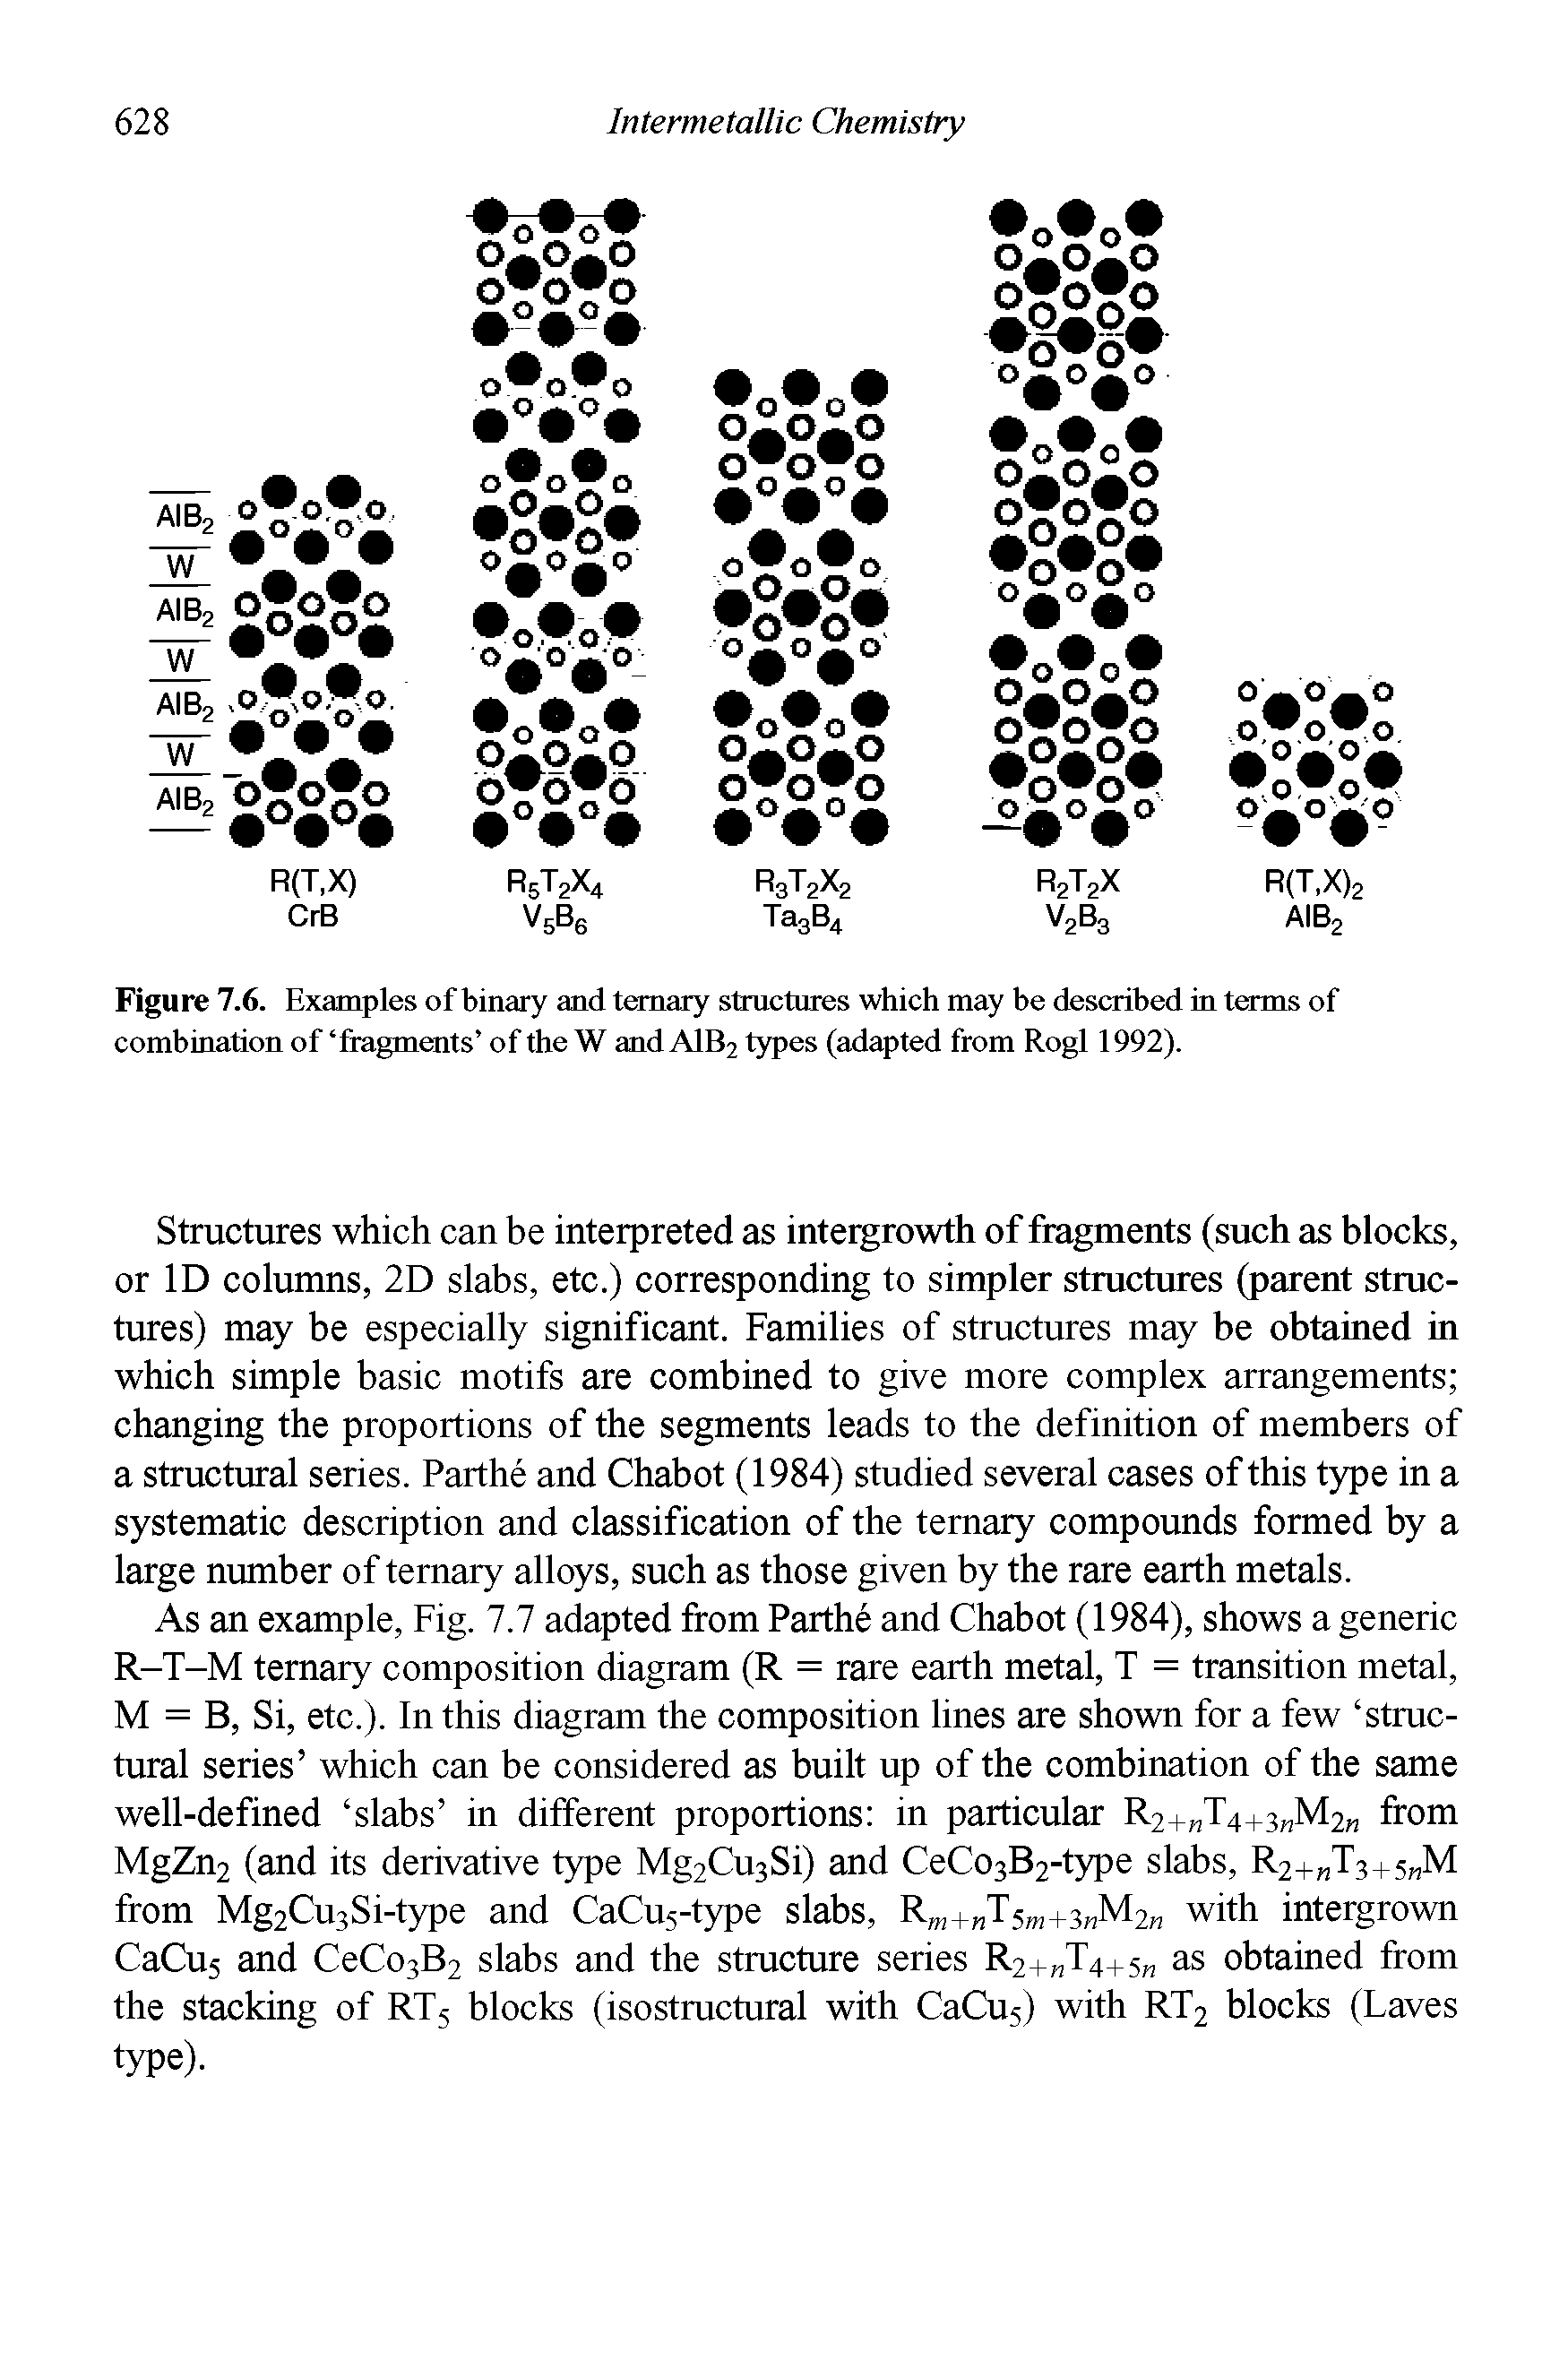 Figure 7.6. Examples of binary and ternary structures which may be described in terms of combination of fragments of the W and A1B2 types (adapted from Rogl 1992).